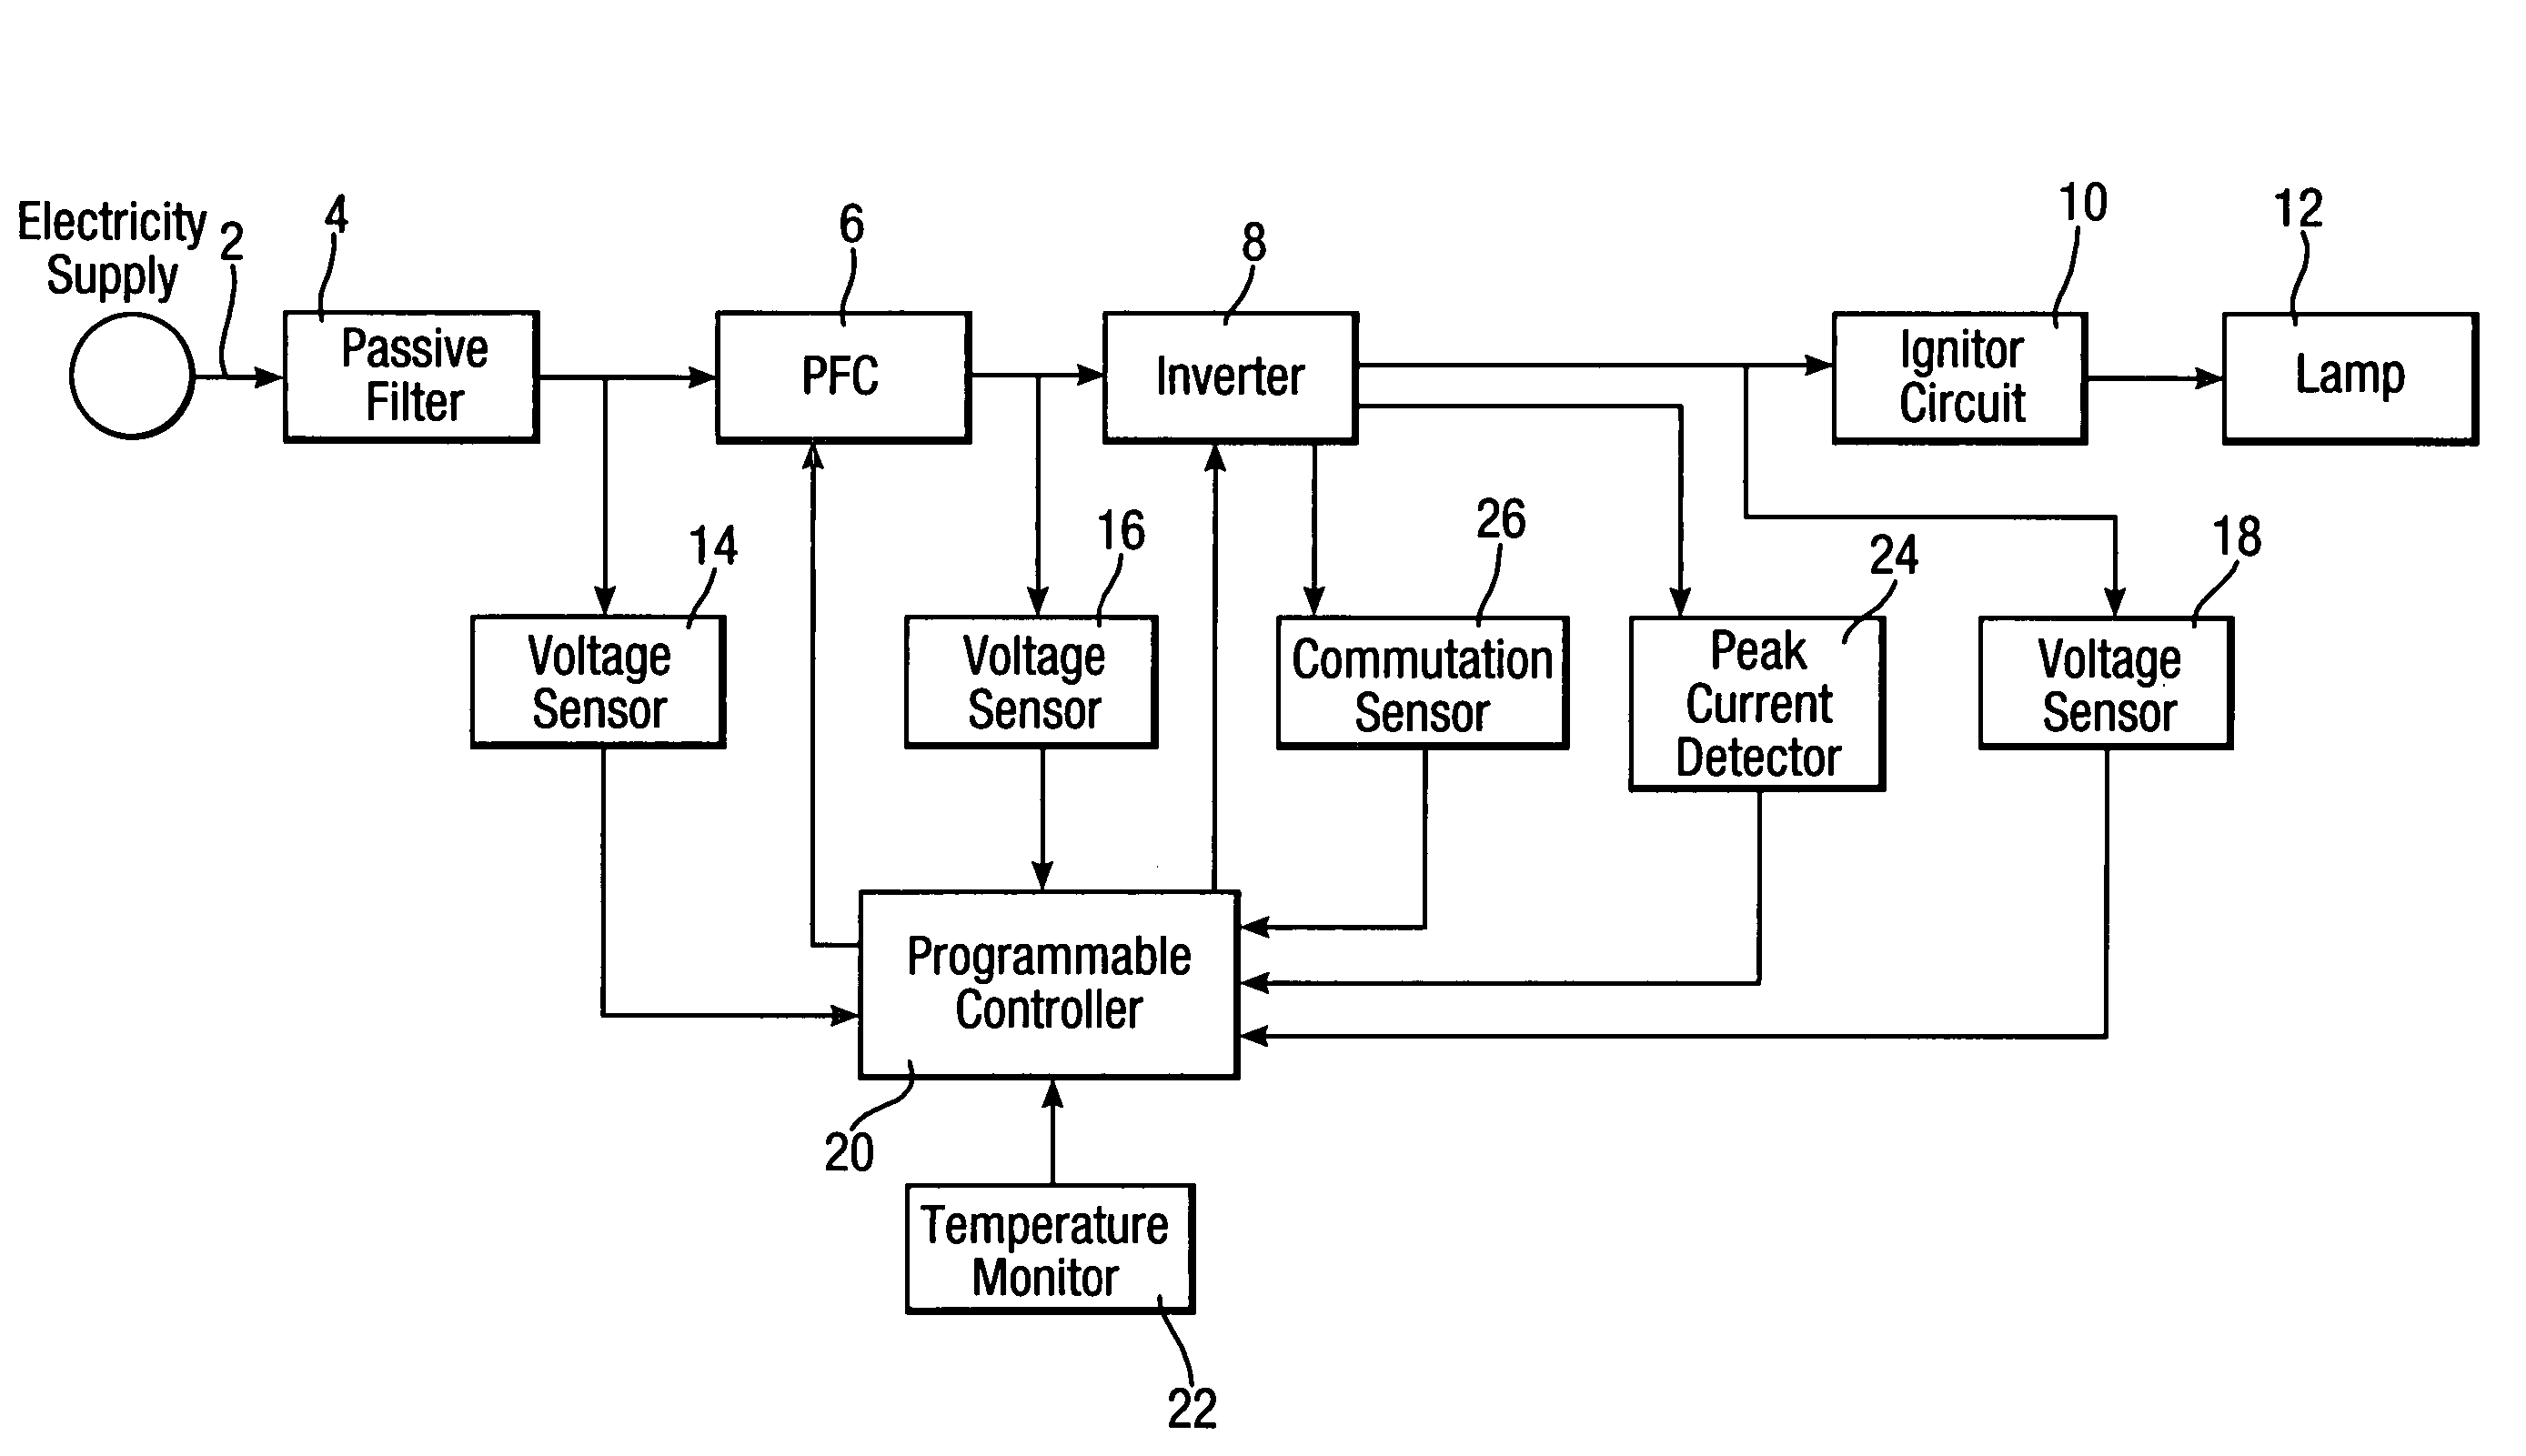 Process for operating a discharge lamp